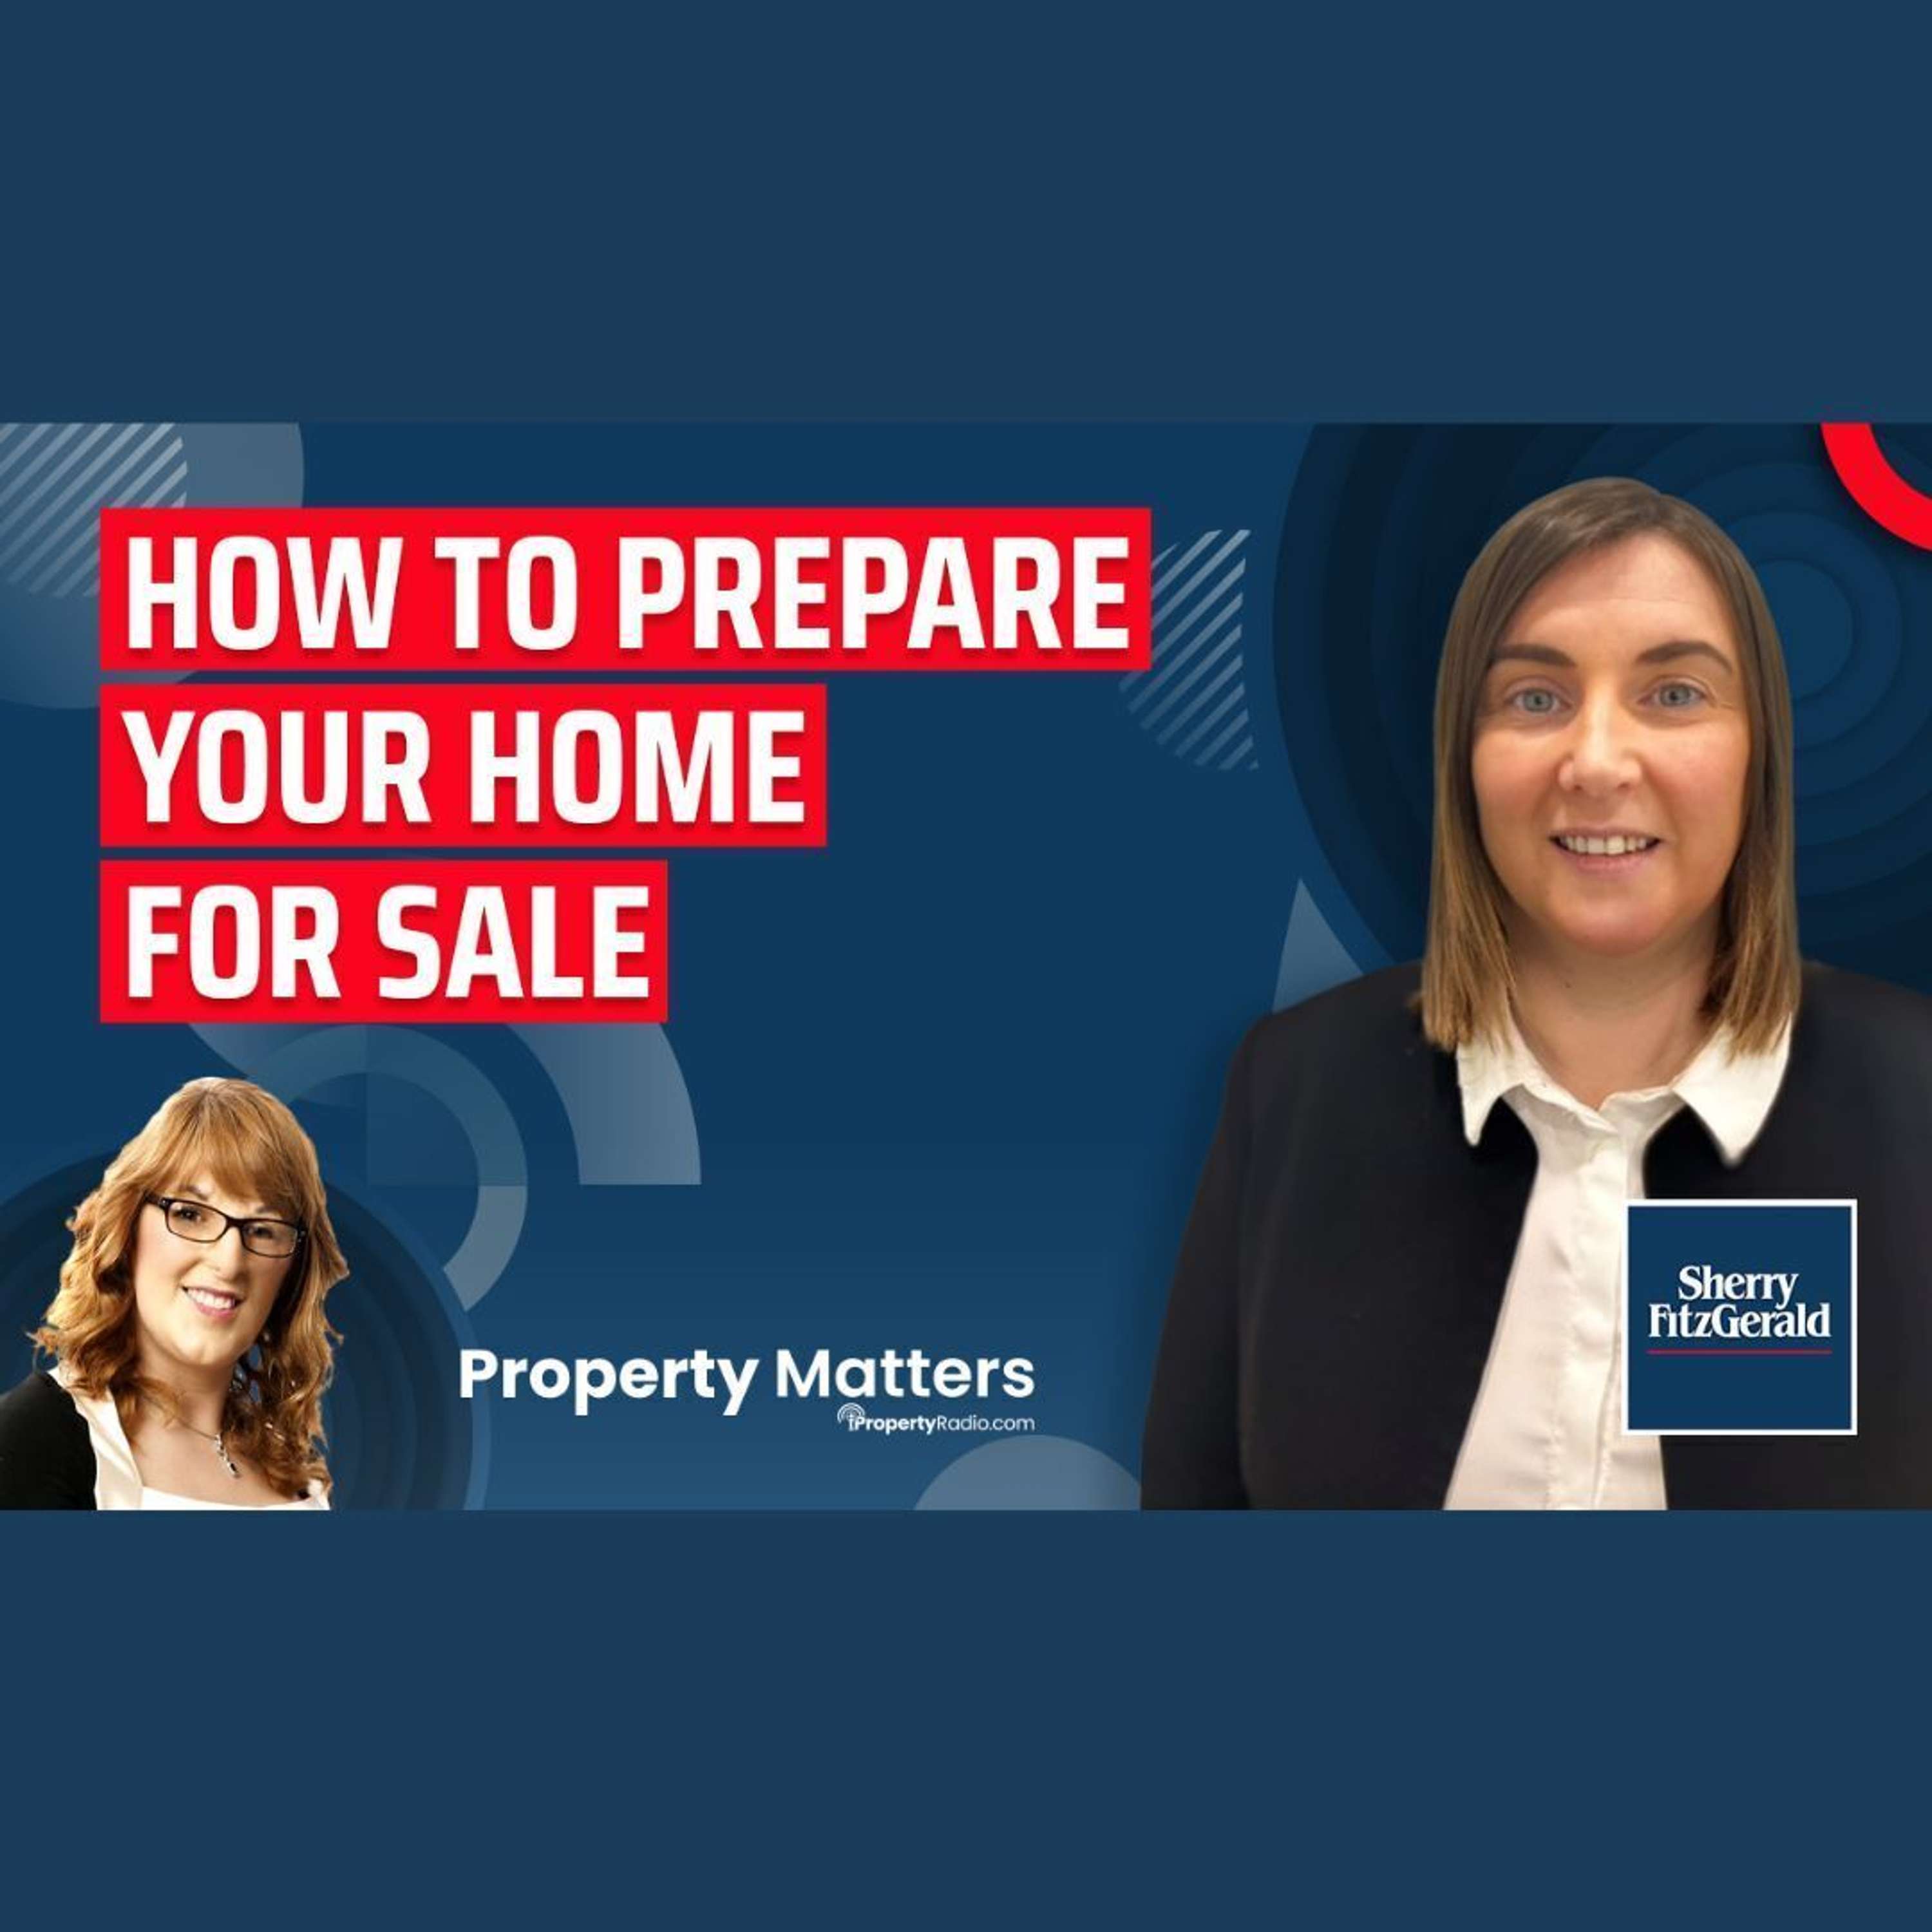 How to prepare your home for sale